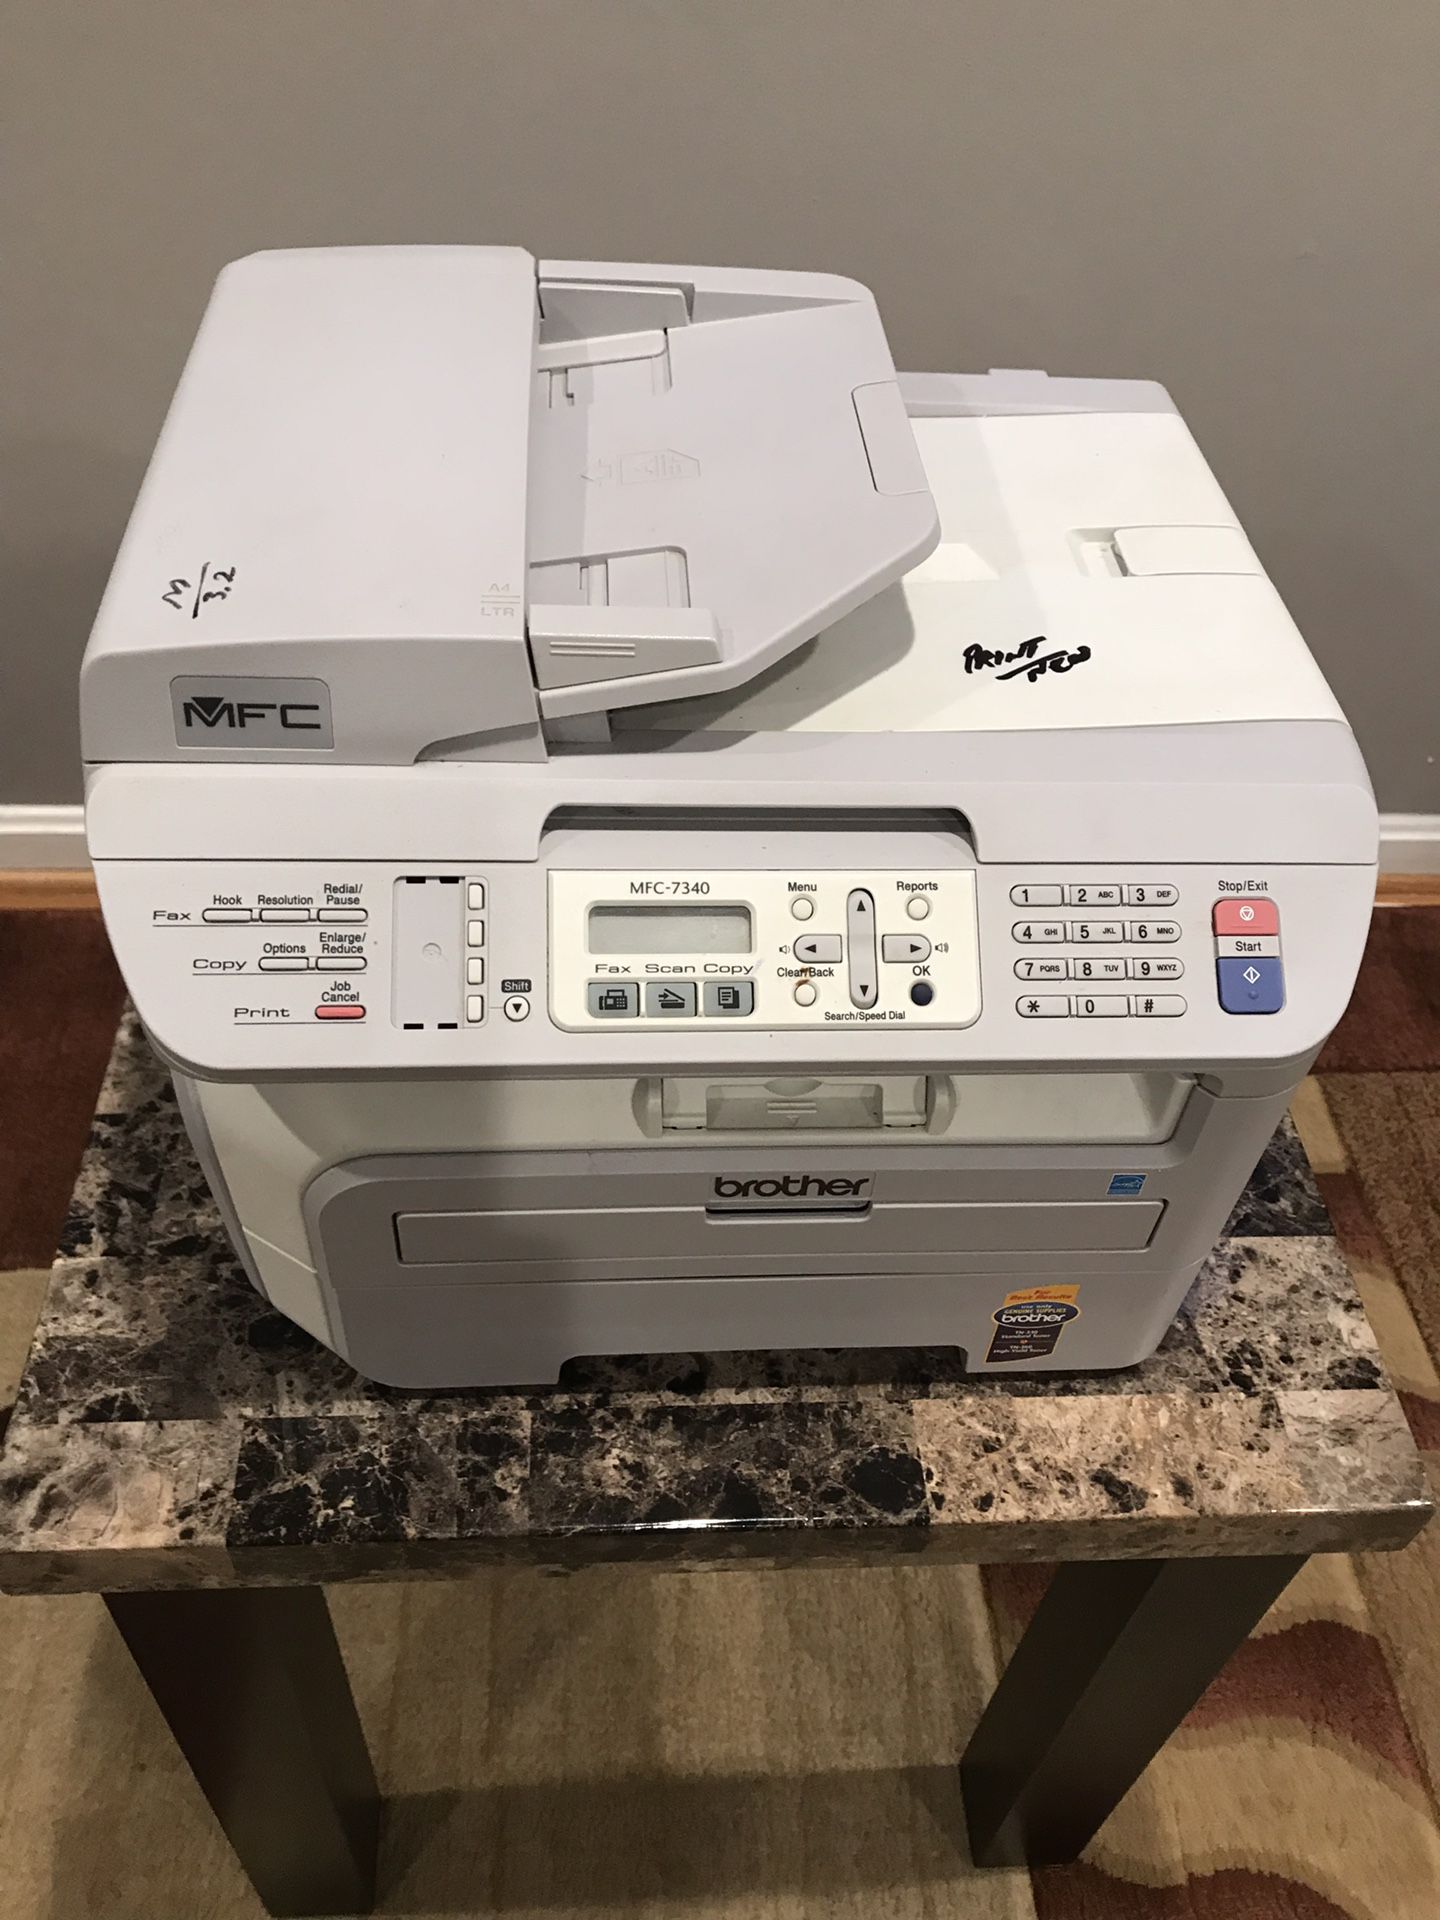 Printer 3 in 1 Brother MFC-7340 with one extra toner